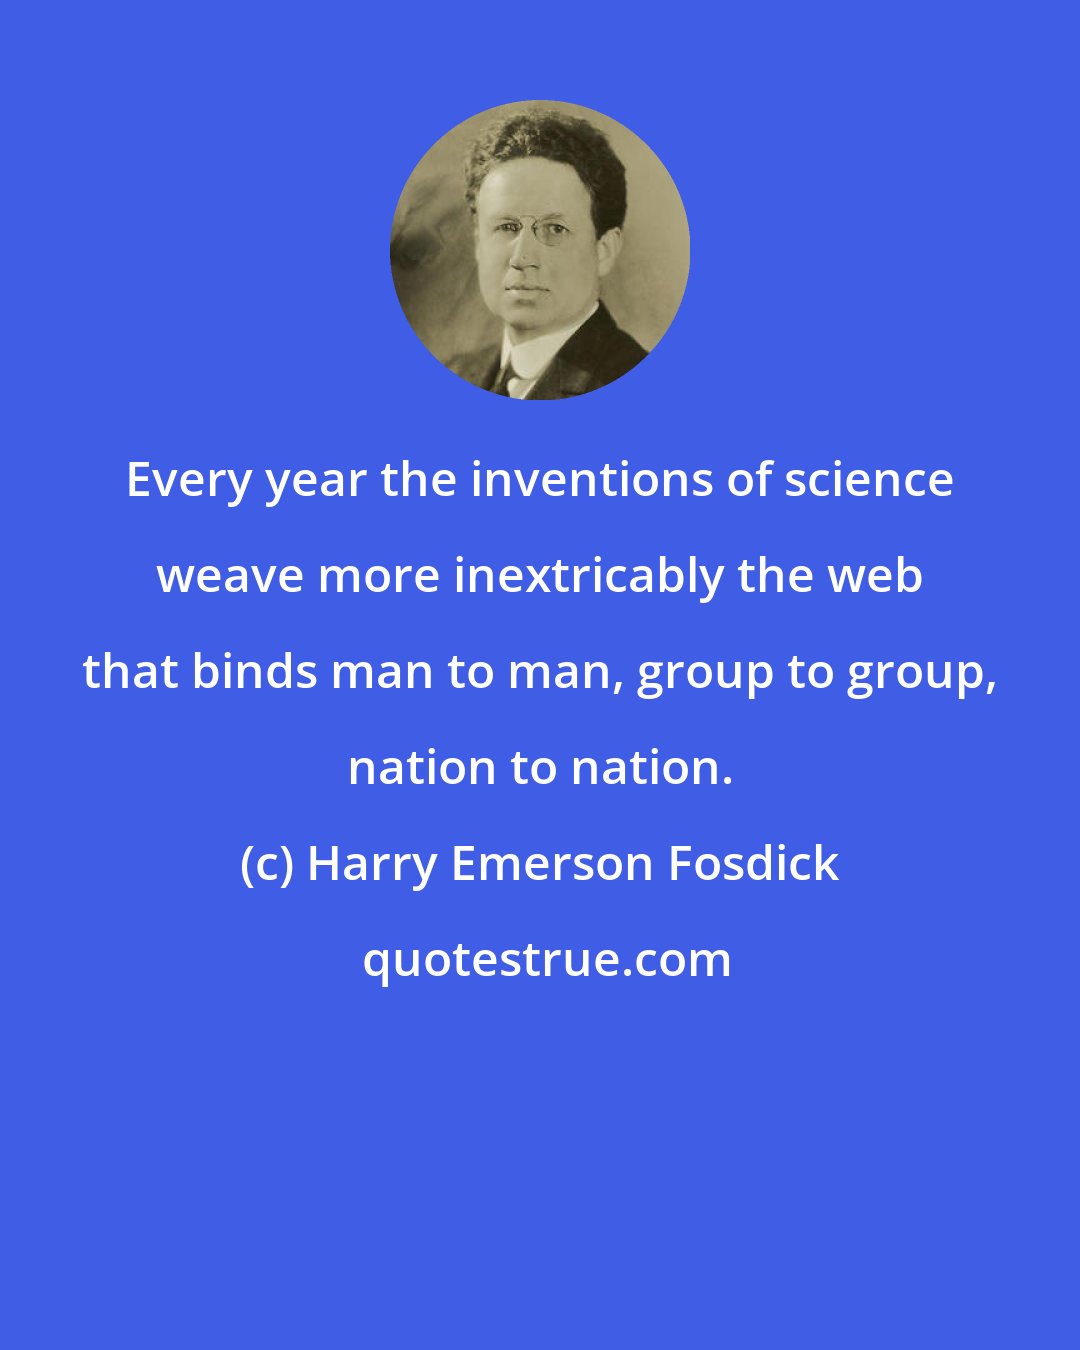 Harry Emerson Fosdick: Every year the inventions of science weave more inextricably the web that binds man to man, group to group, nation to nation.